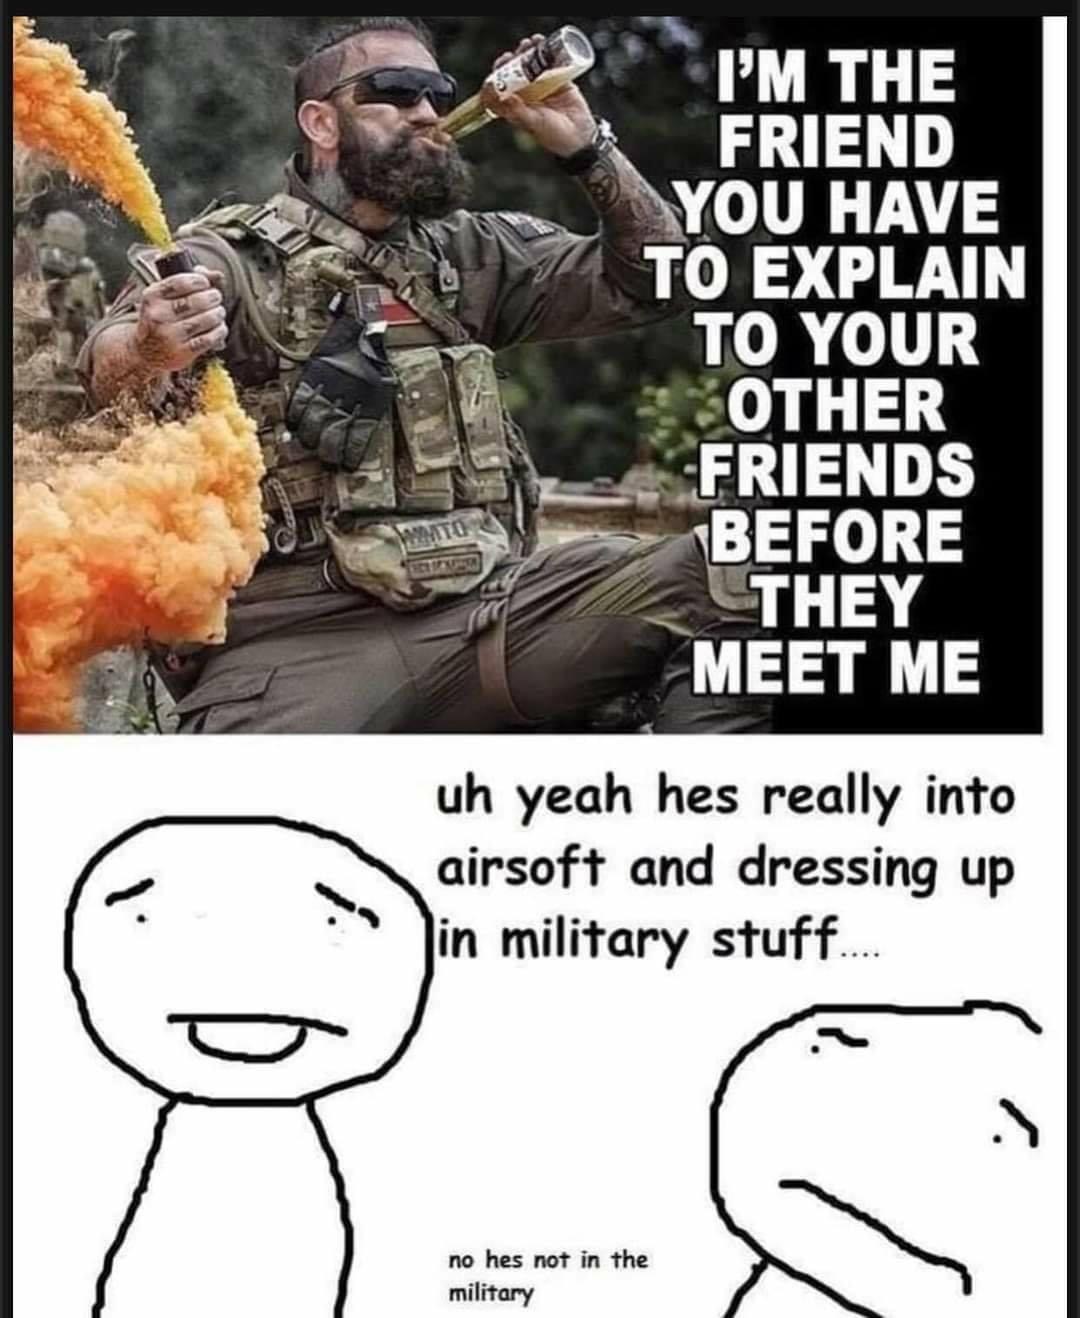 tacticool meme - I'M The Friend You Have To Explain To Your Other Friends Before They Meet Me Wato uh yeah hes really into airsoft and dressing up in military stuff.... . no hes not in the military